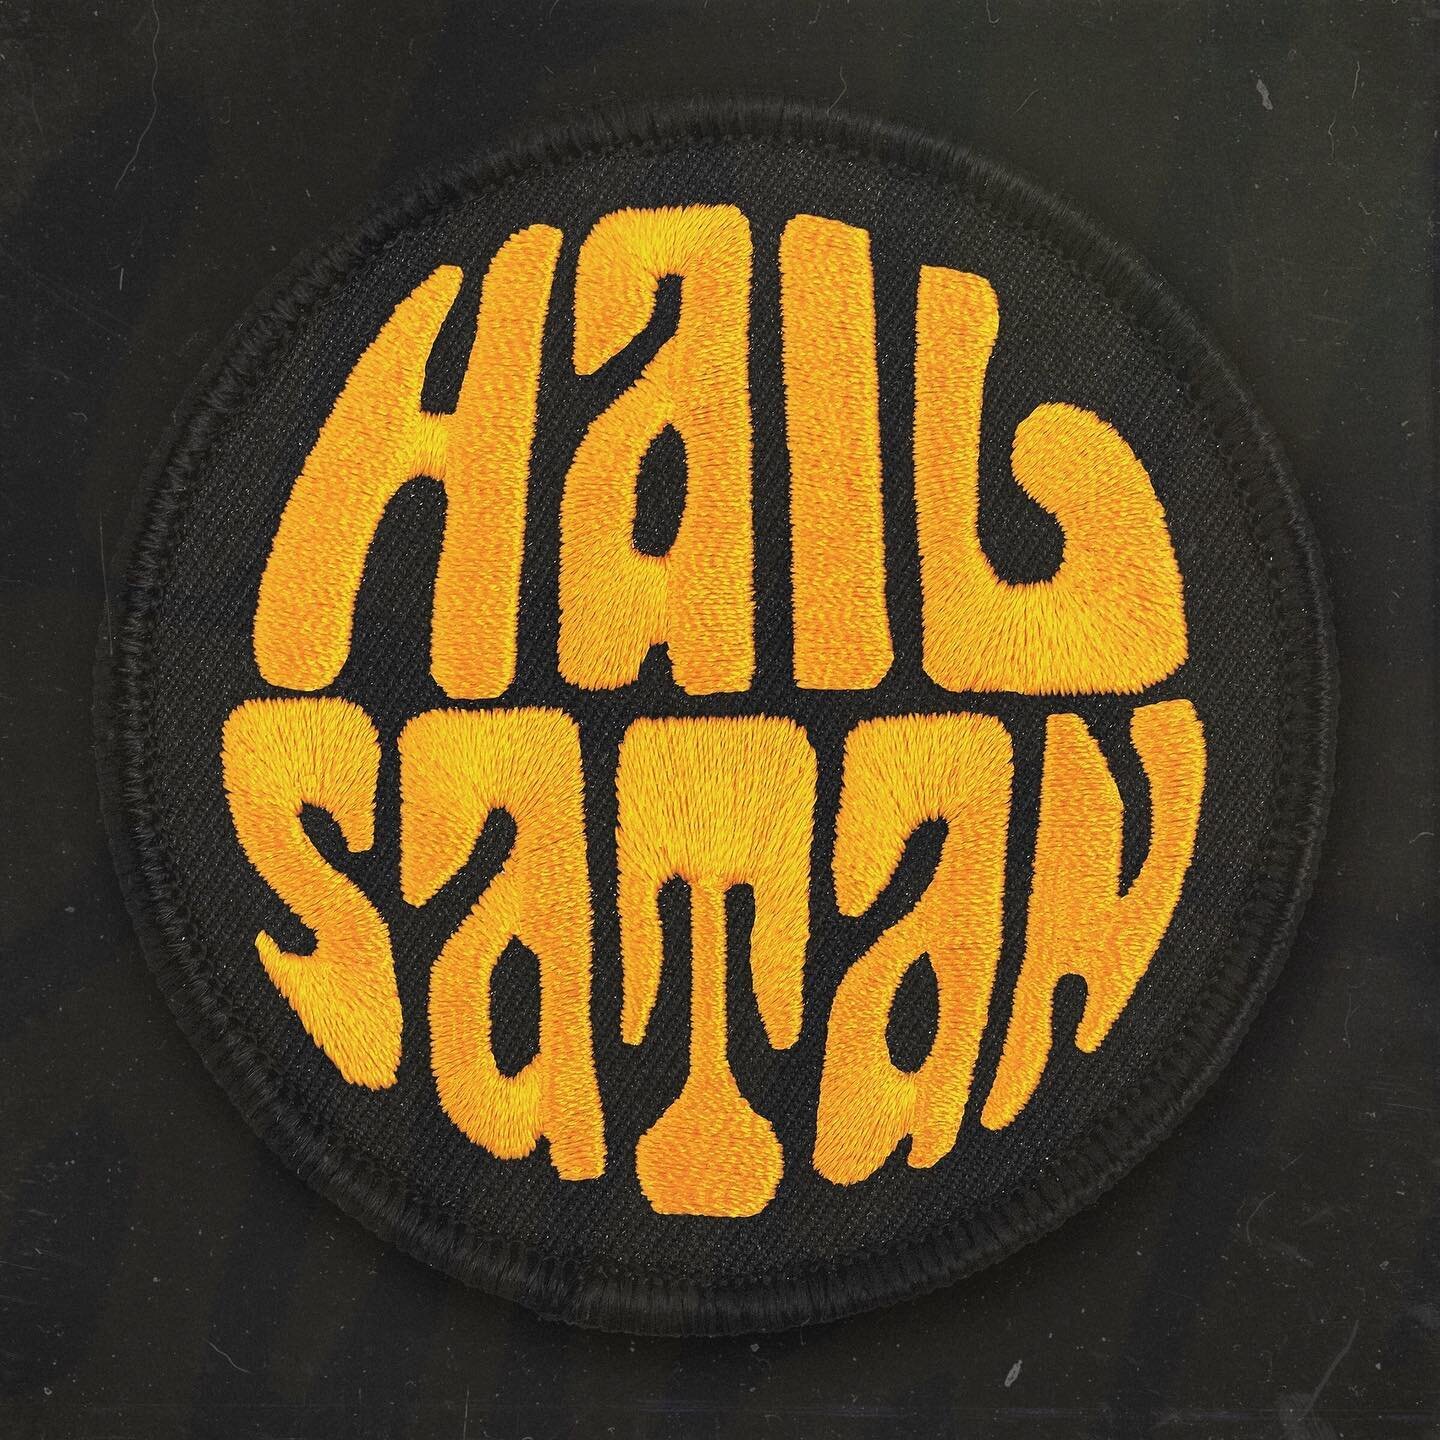 Our 3&rdquo; HAIL SATAN patch.
Because who the fuck else are you gonna turn to?
If you can&rsquo;t beat &lsquo;em, join &lsquo;em.
#deathpatches #hailsatan #godhatesusall